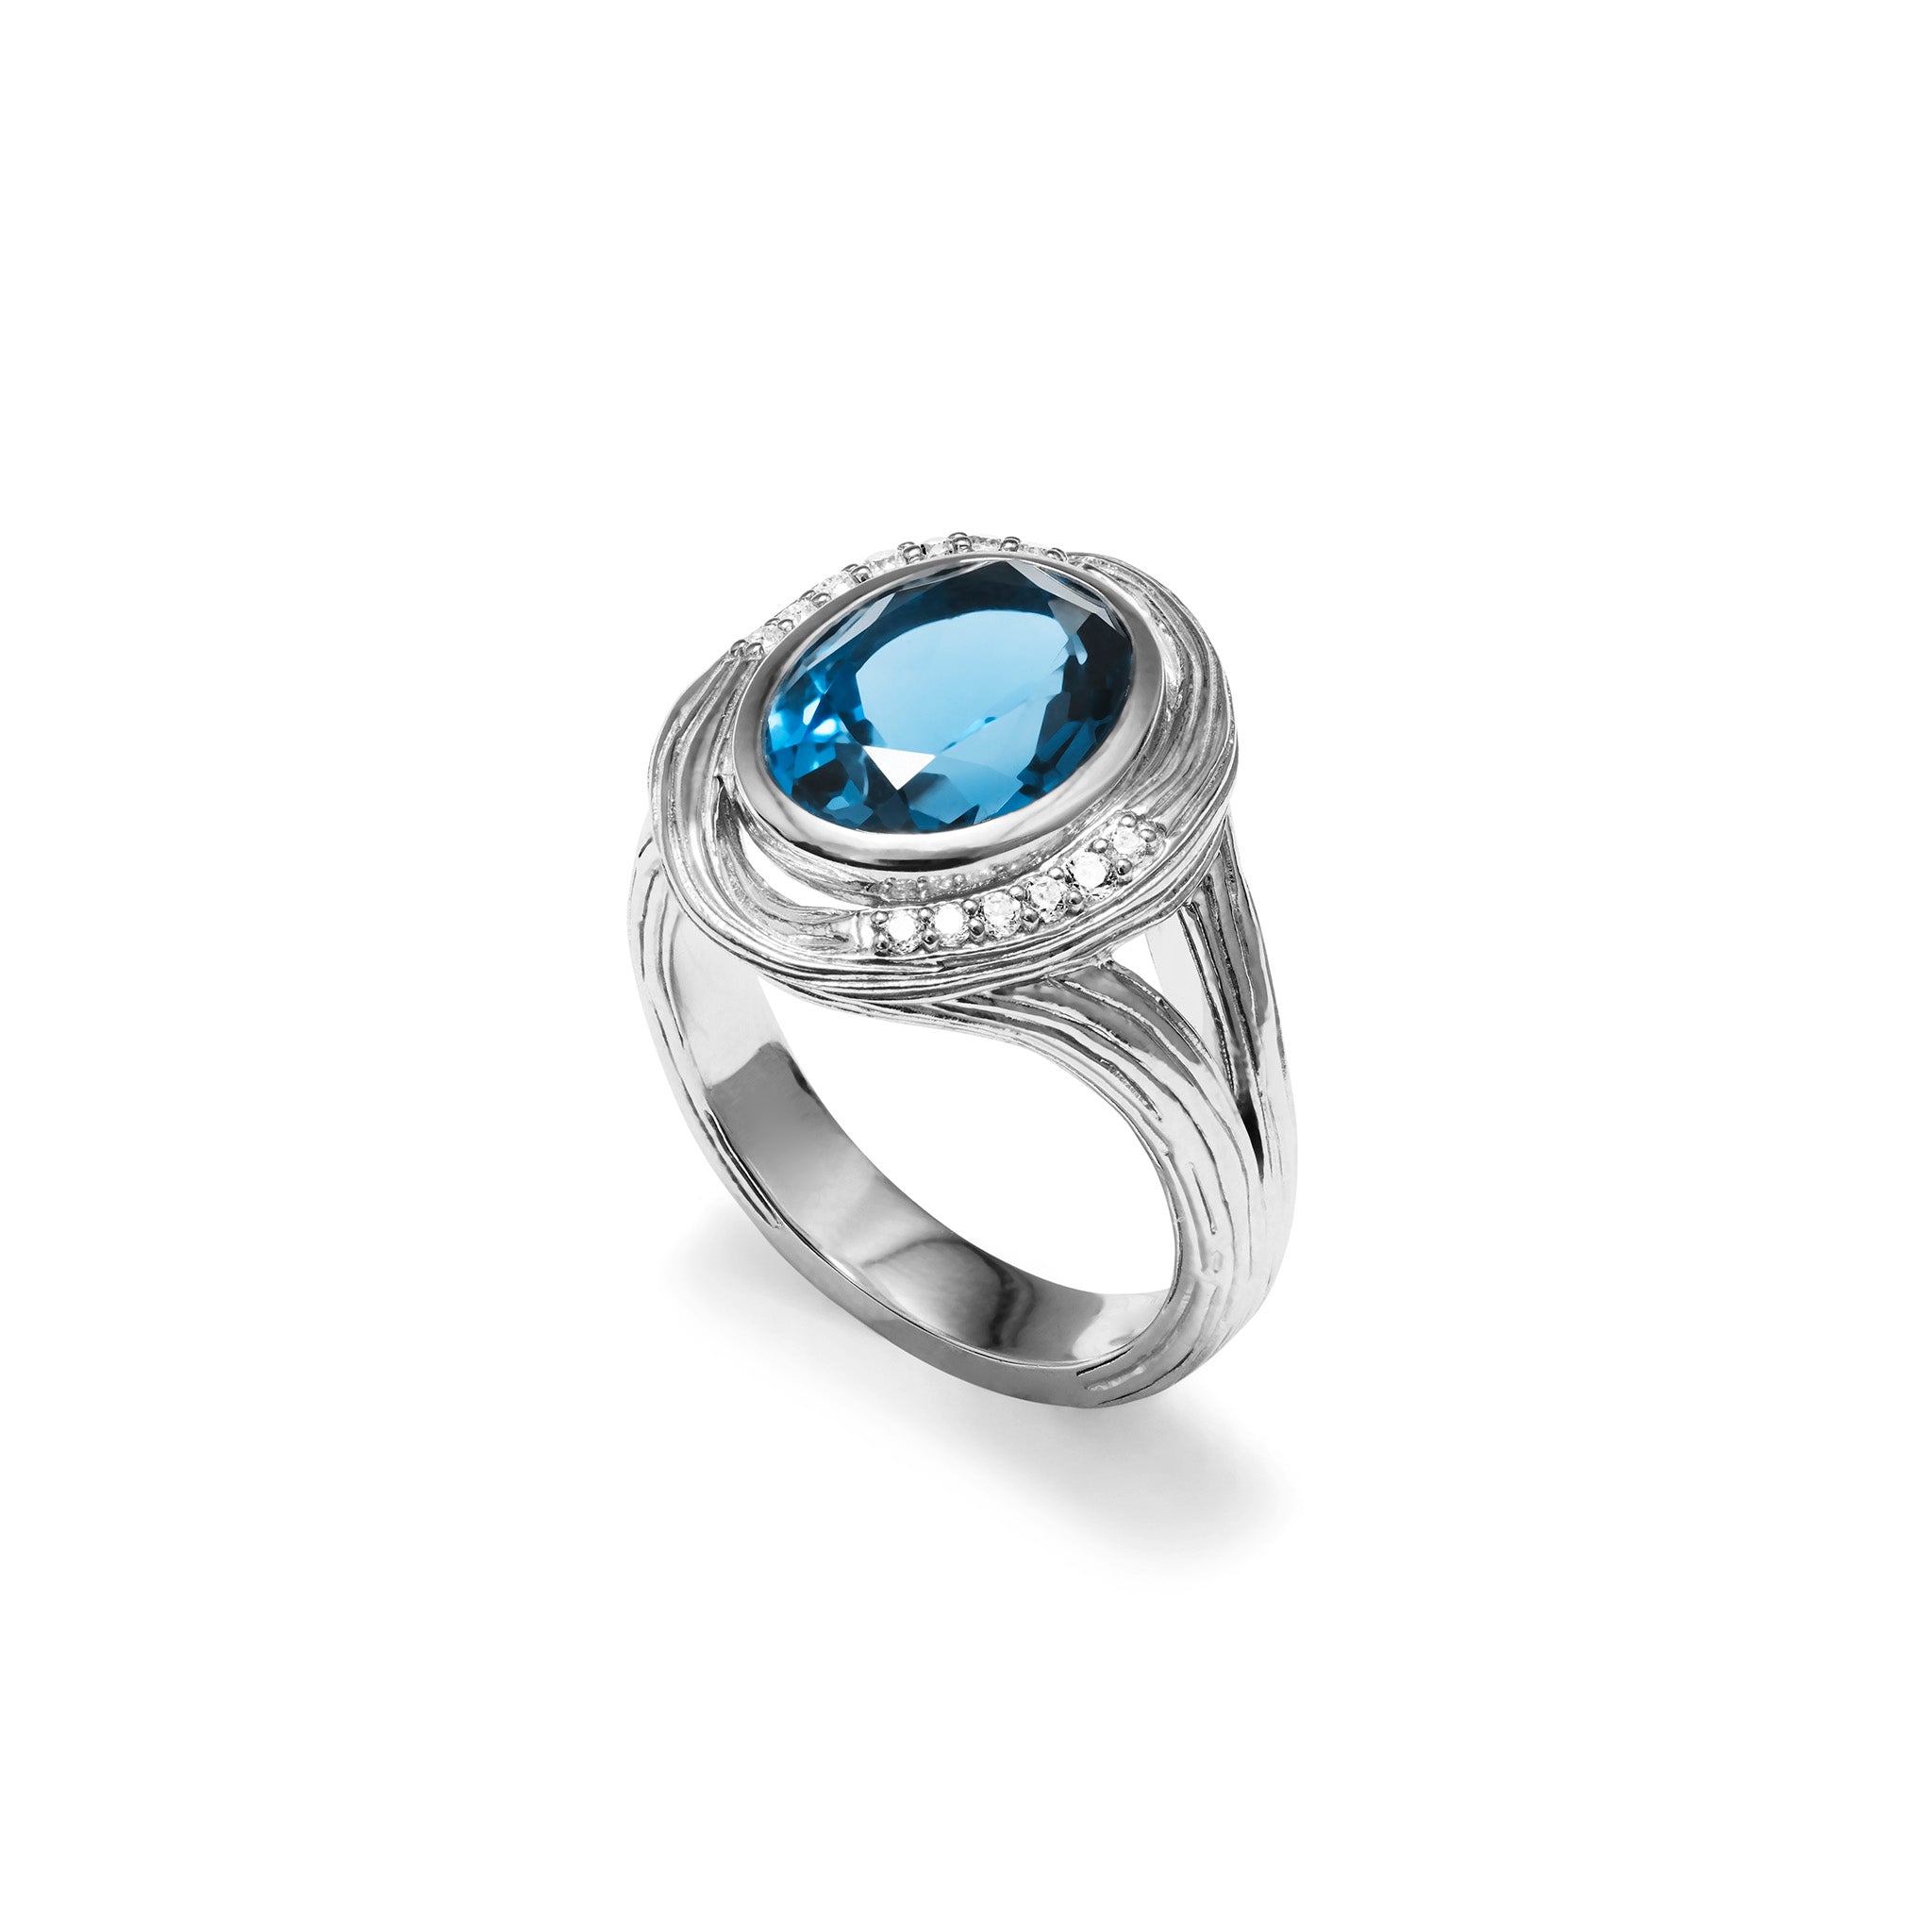 Santorini Oval Ring with London Blue Topaz and Diamonds